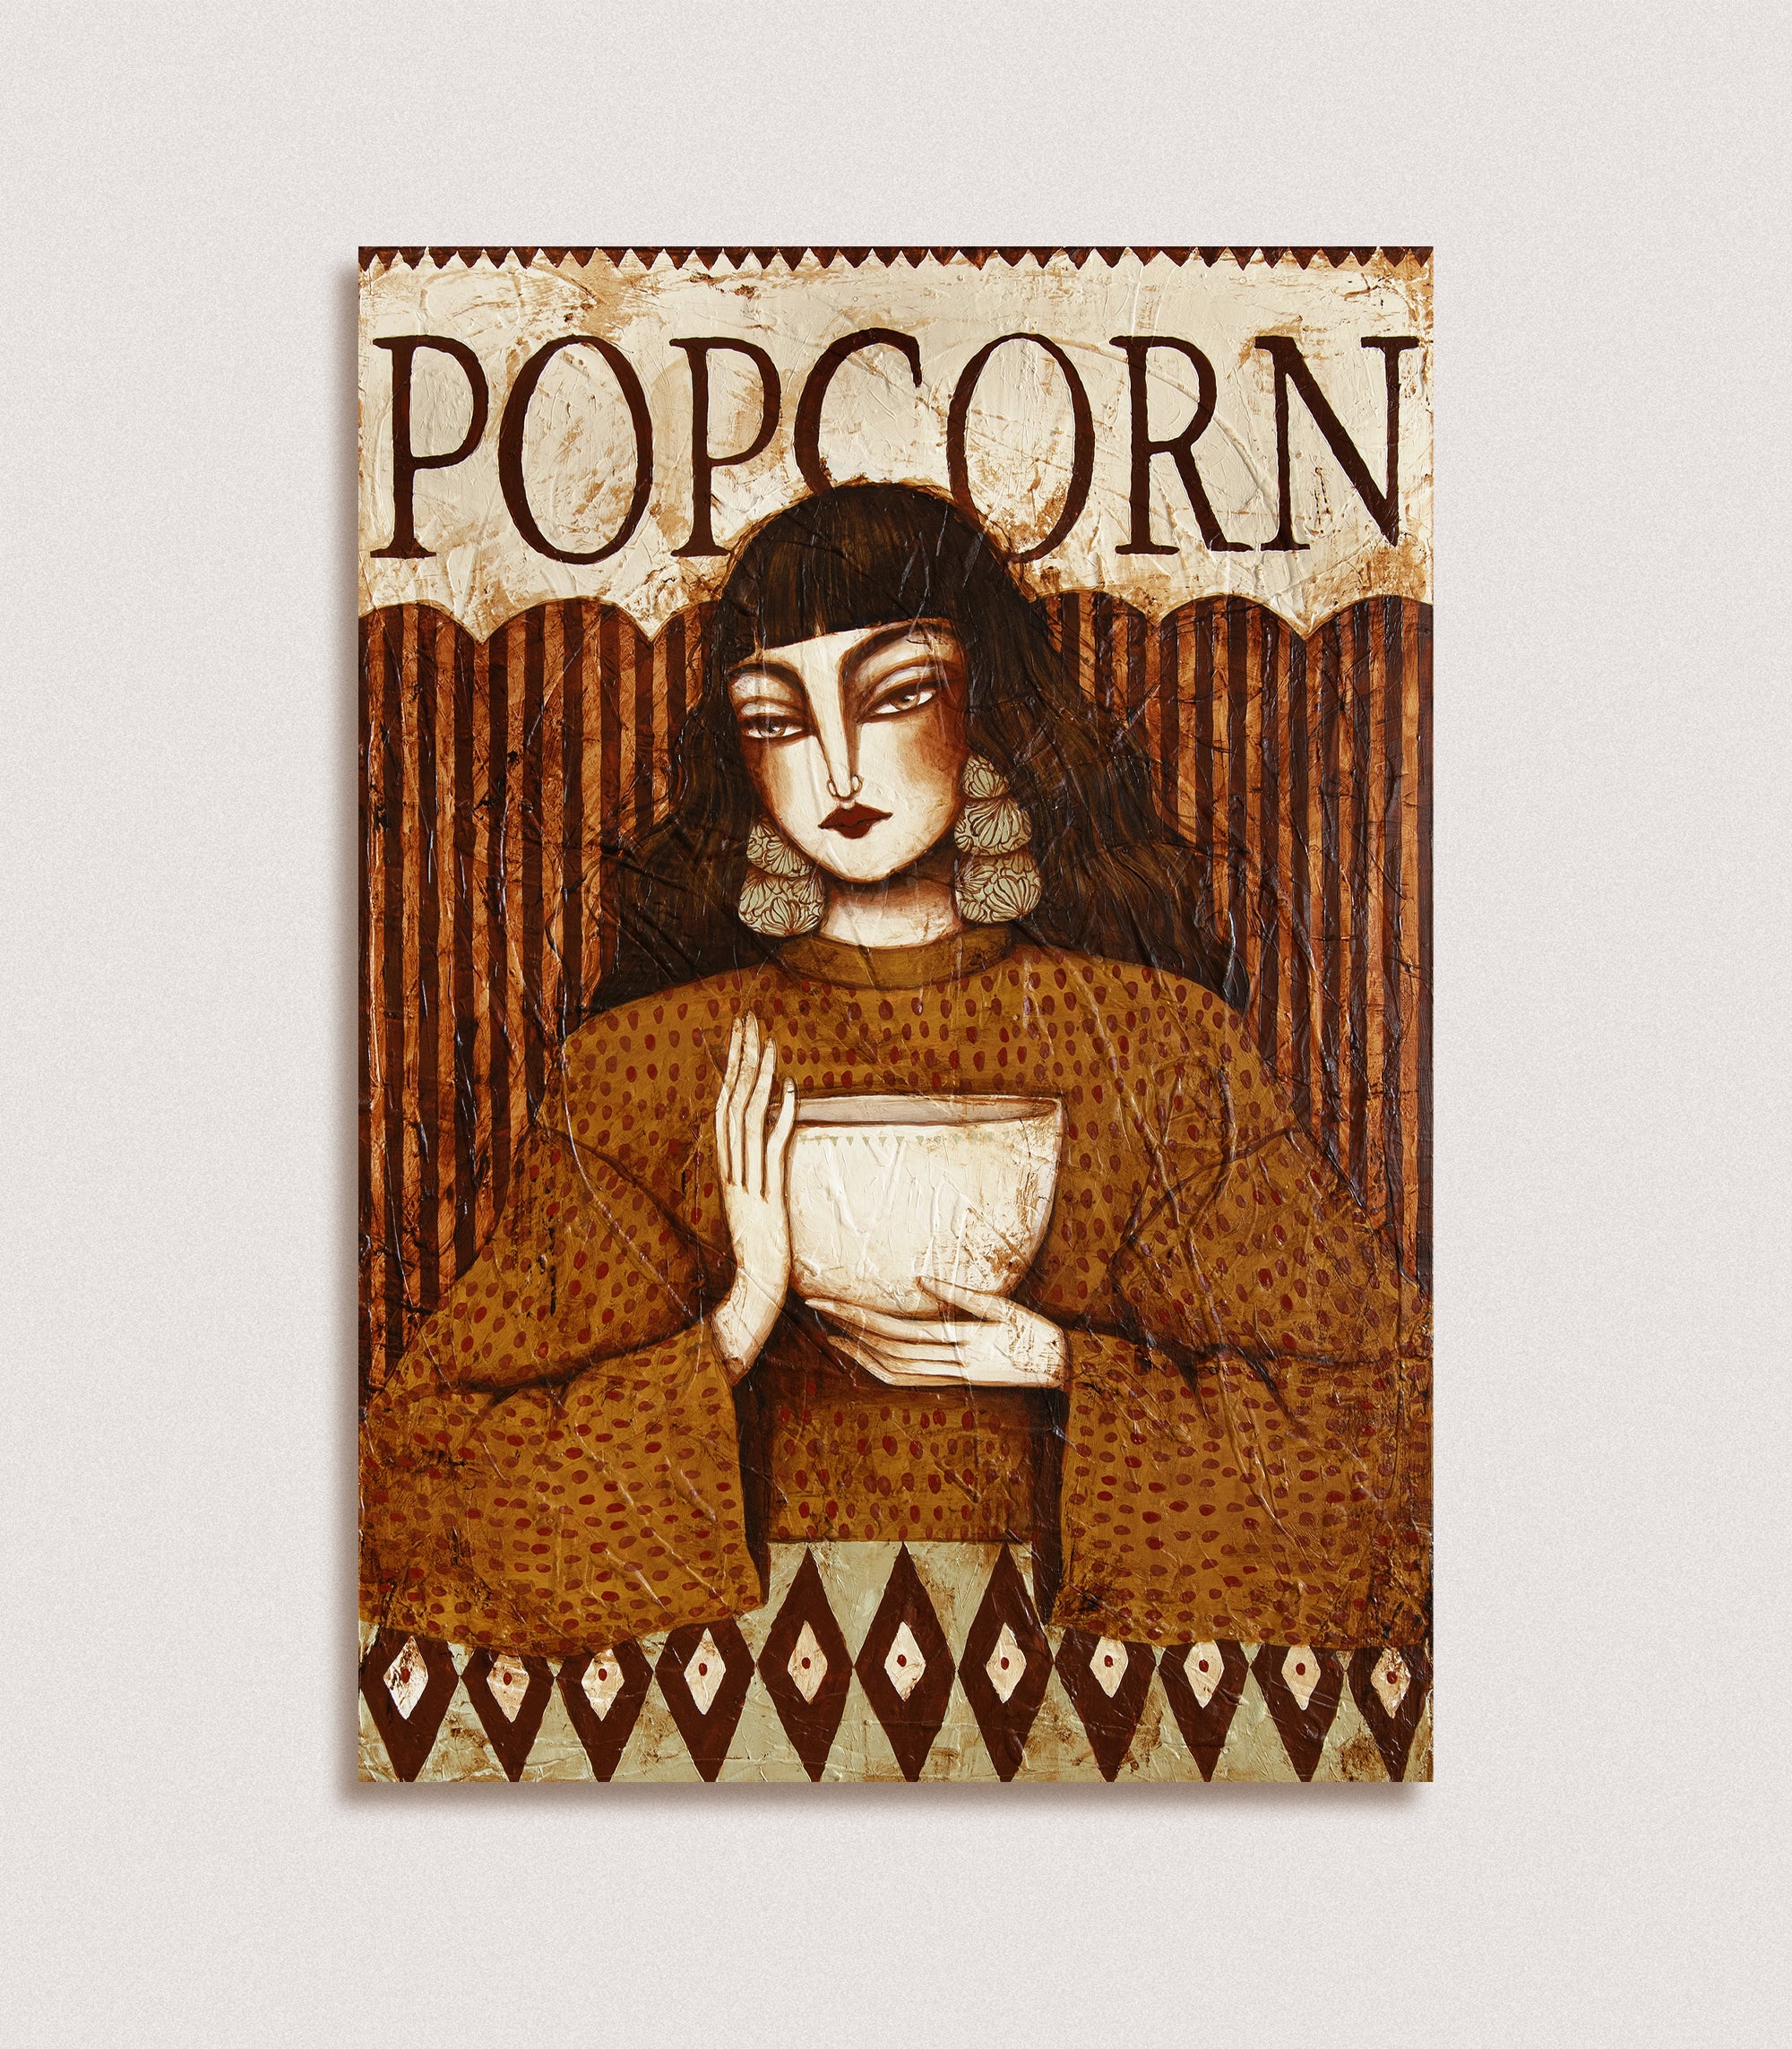 POPCORN - SOLD TO THE NETHERLANDS